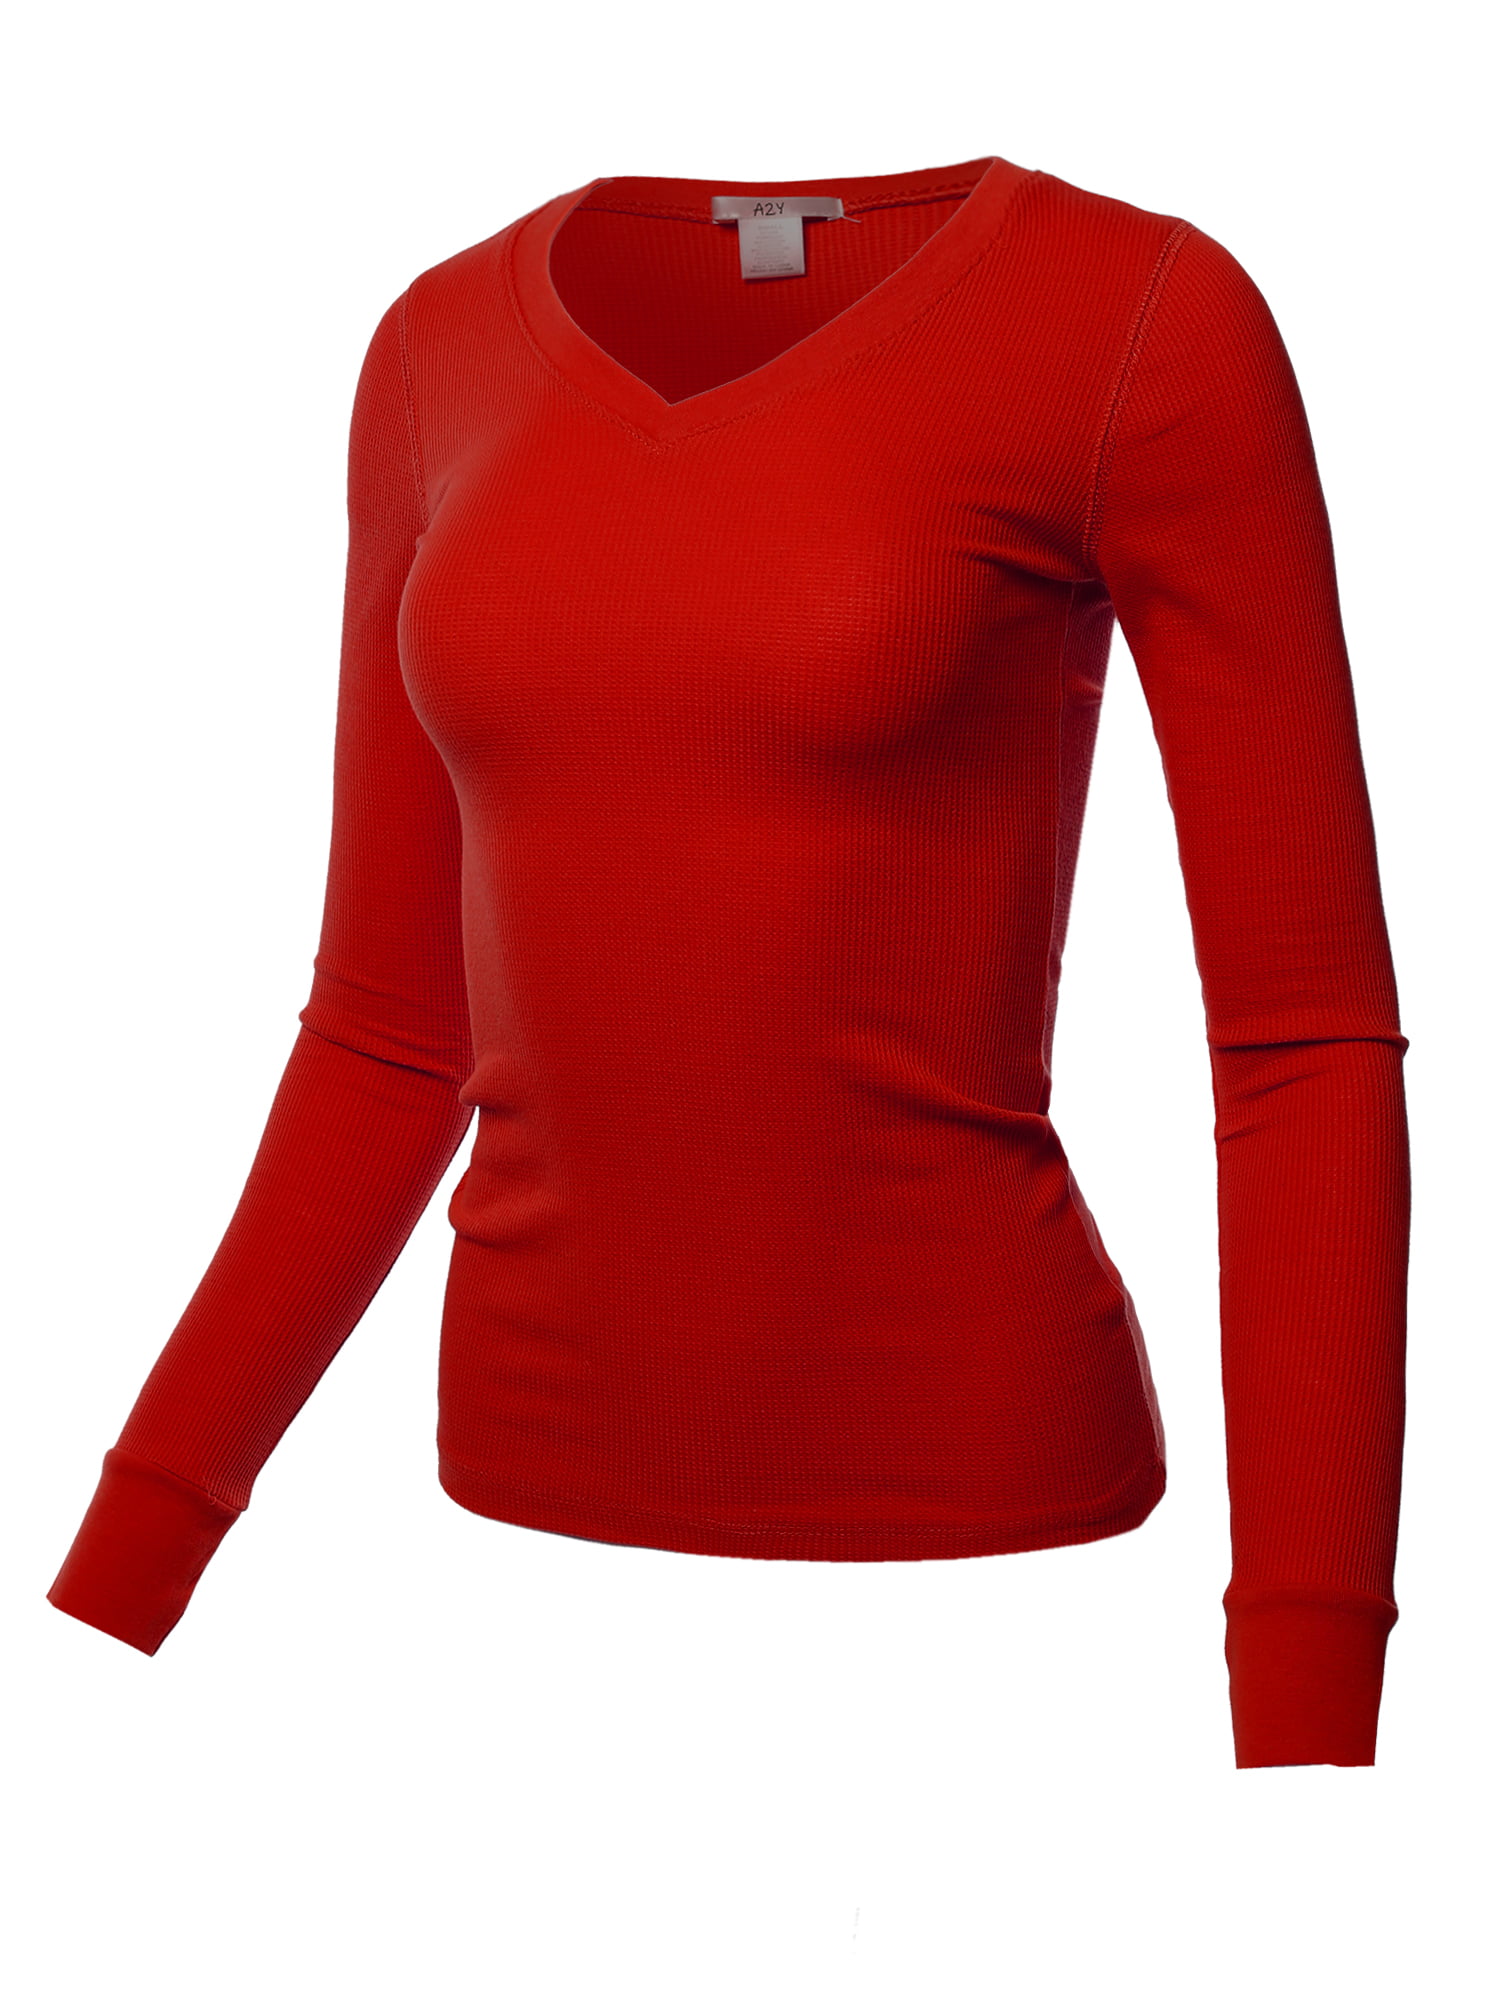 Women\'s A2Y Top Fitted Red Shirt Sleeve Thermal 3XL V-Neck Scarlet Solid Basic Long